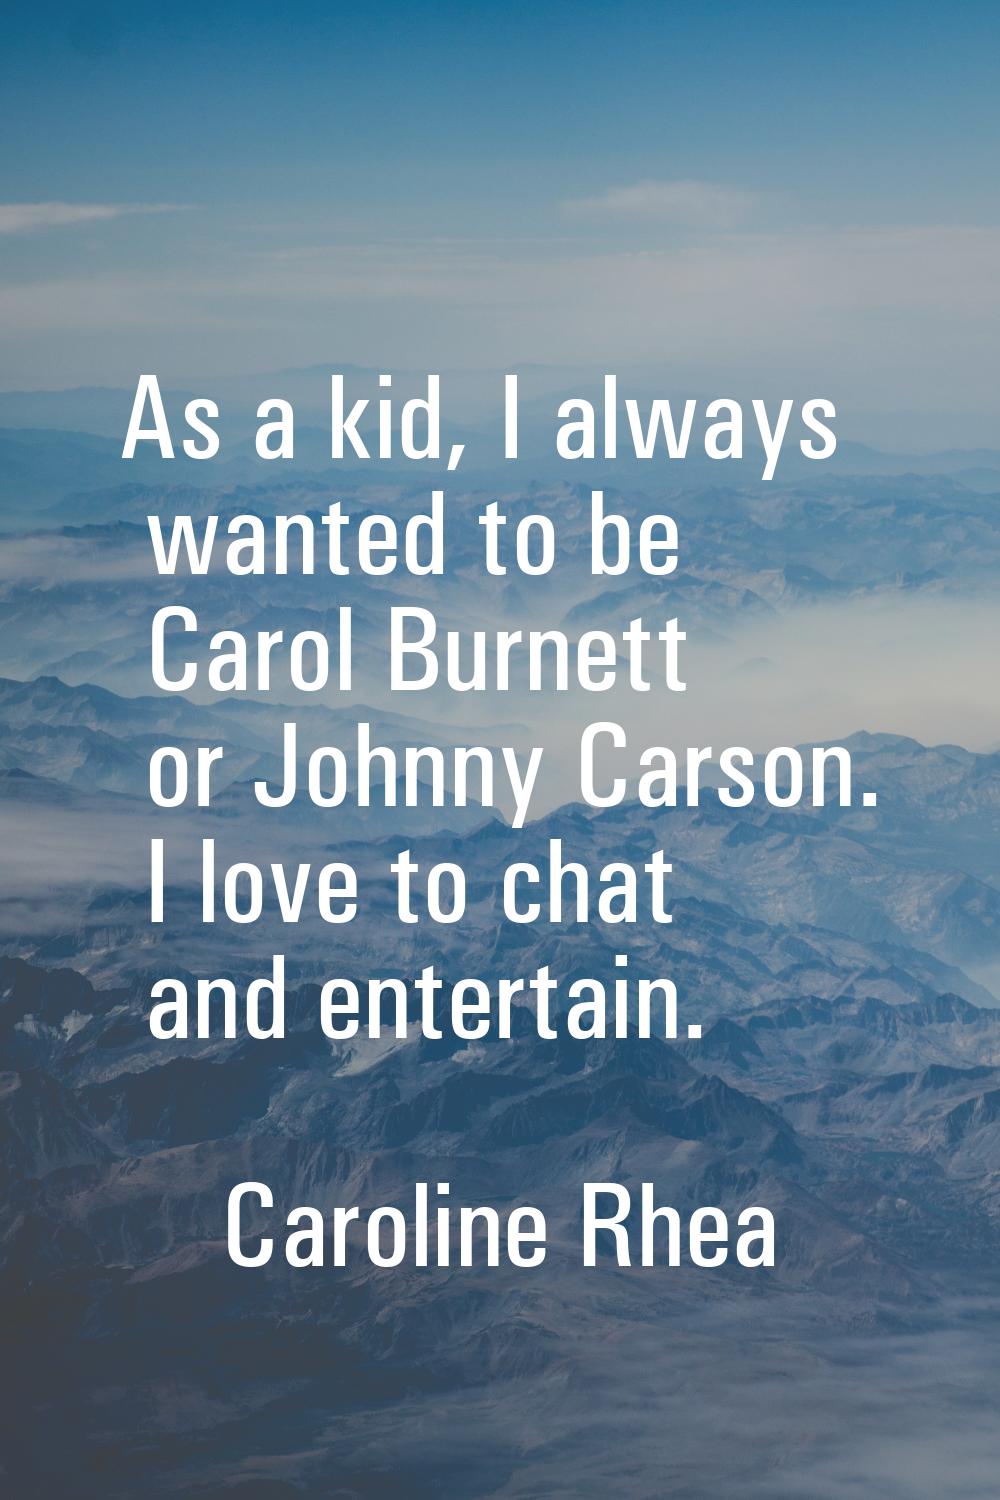 As a kid, I always wanted to be Carol Burnett or Johnny Carson. I love to chat and entertain.